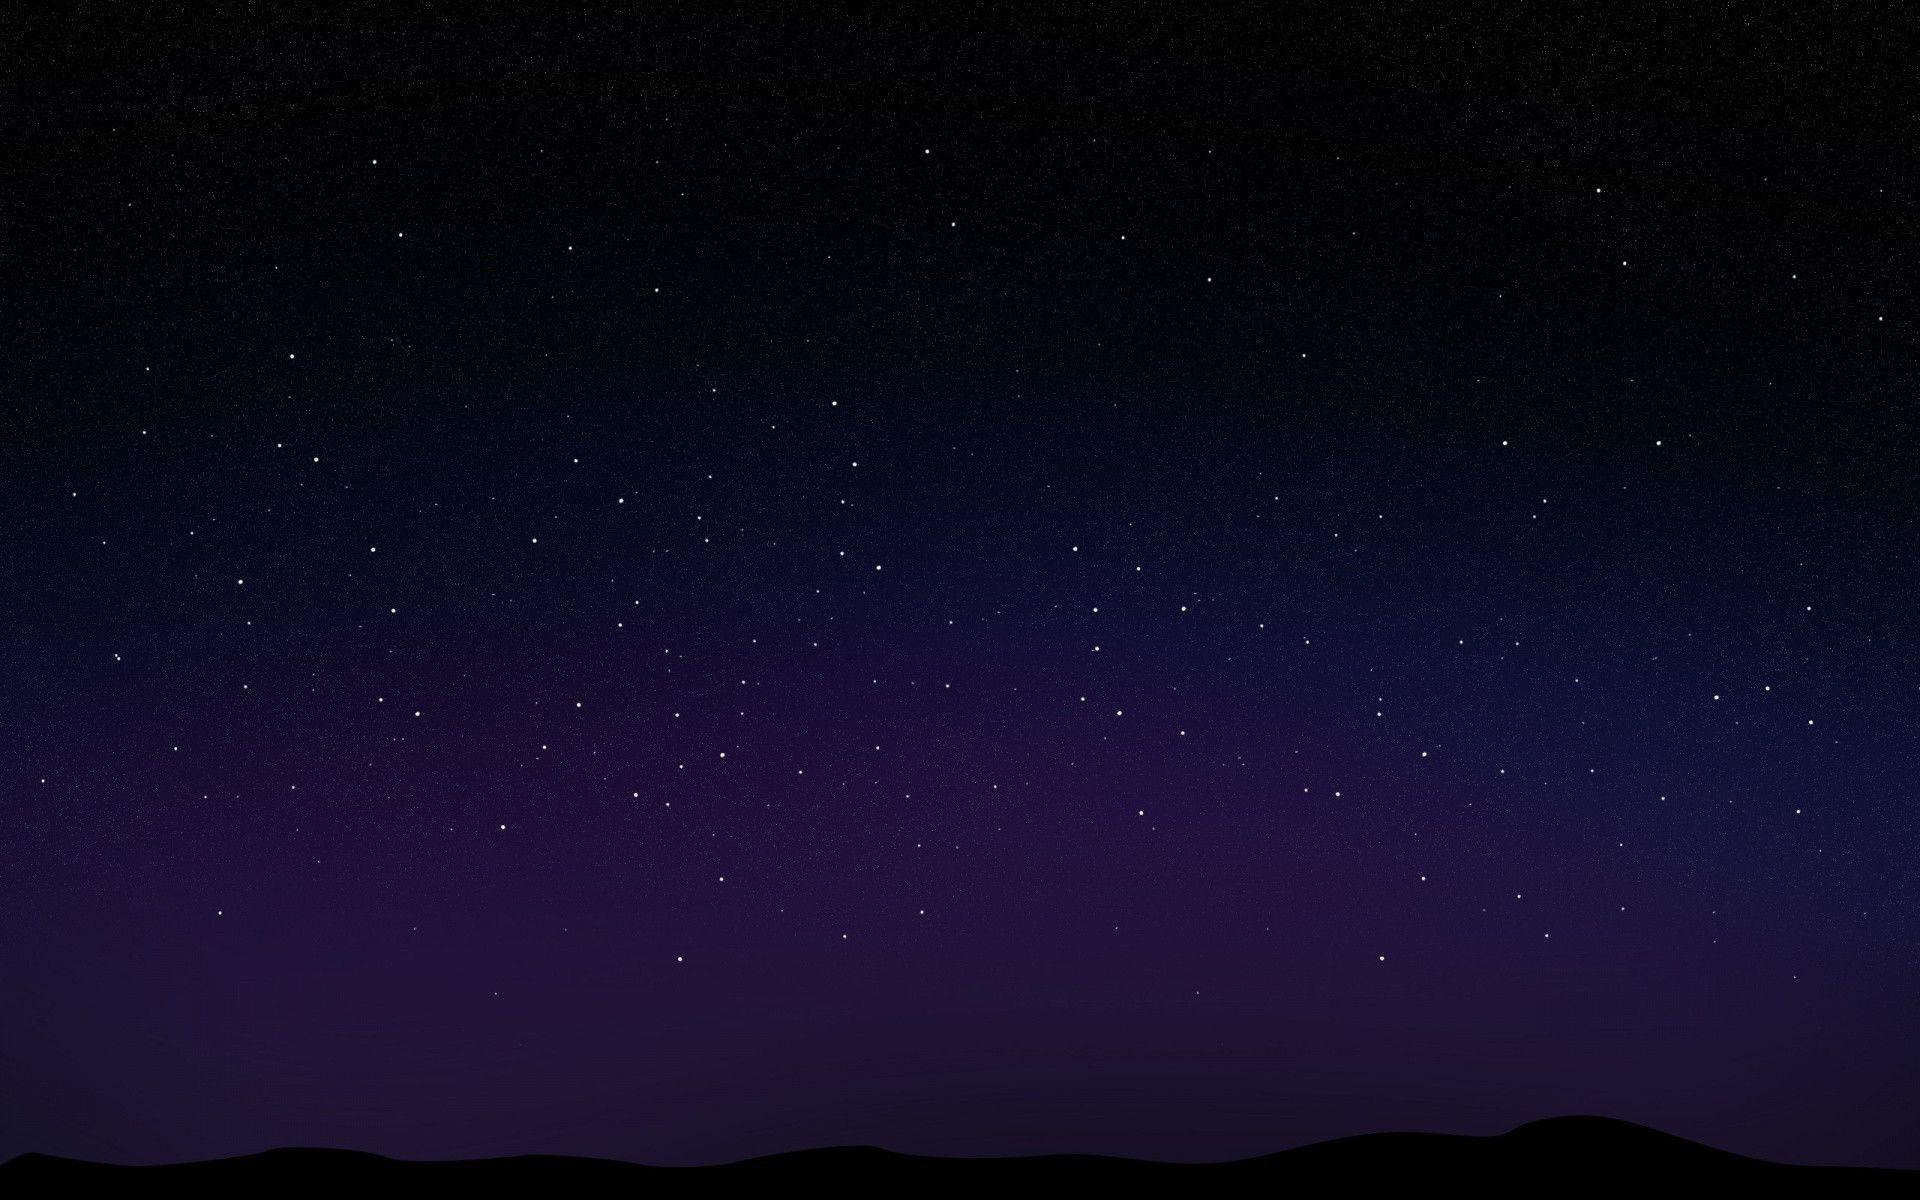 Wallpaper.wiki Night Sky Background PIC WPE002348